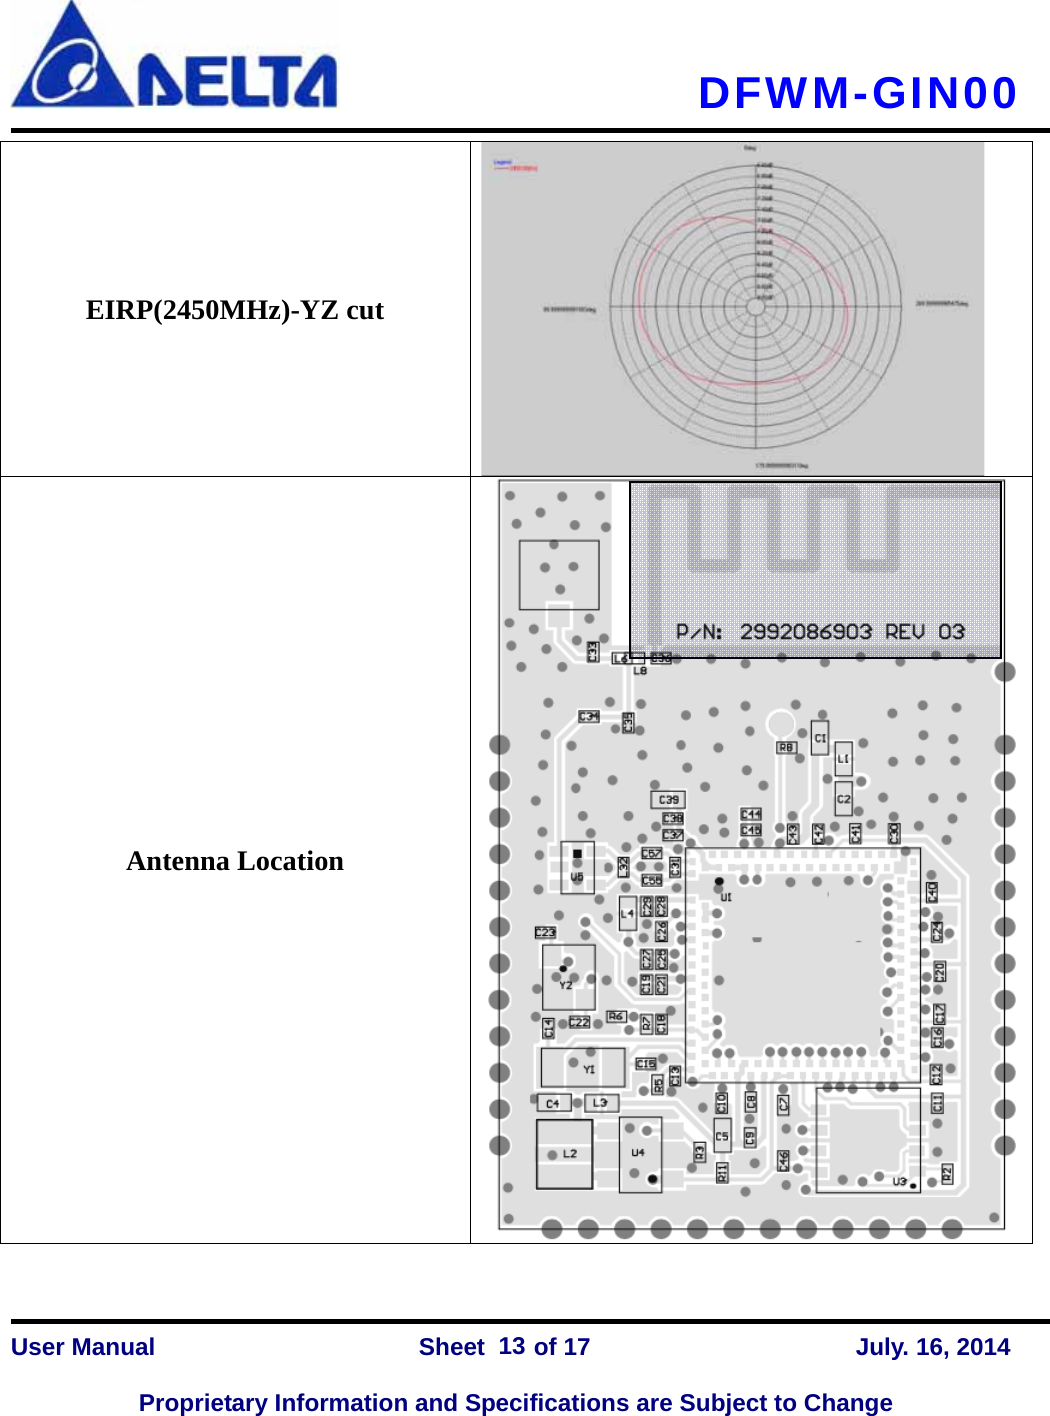   DFWM-GIN00    User Manual                Sheet    of 17      July. 16, 2014  Proprietary Information and Specifications are Subject to Change 13EIRP(2450MHz)-YZ cut Antenna Location  